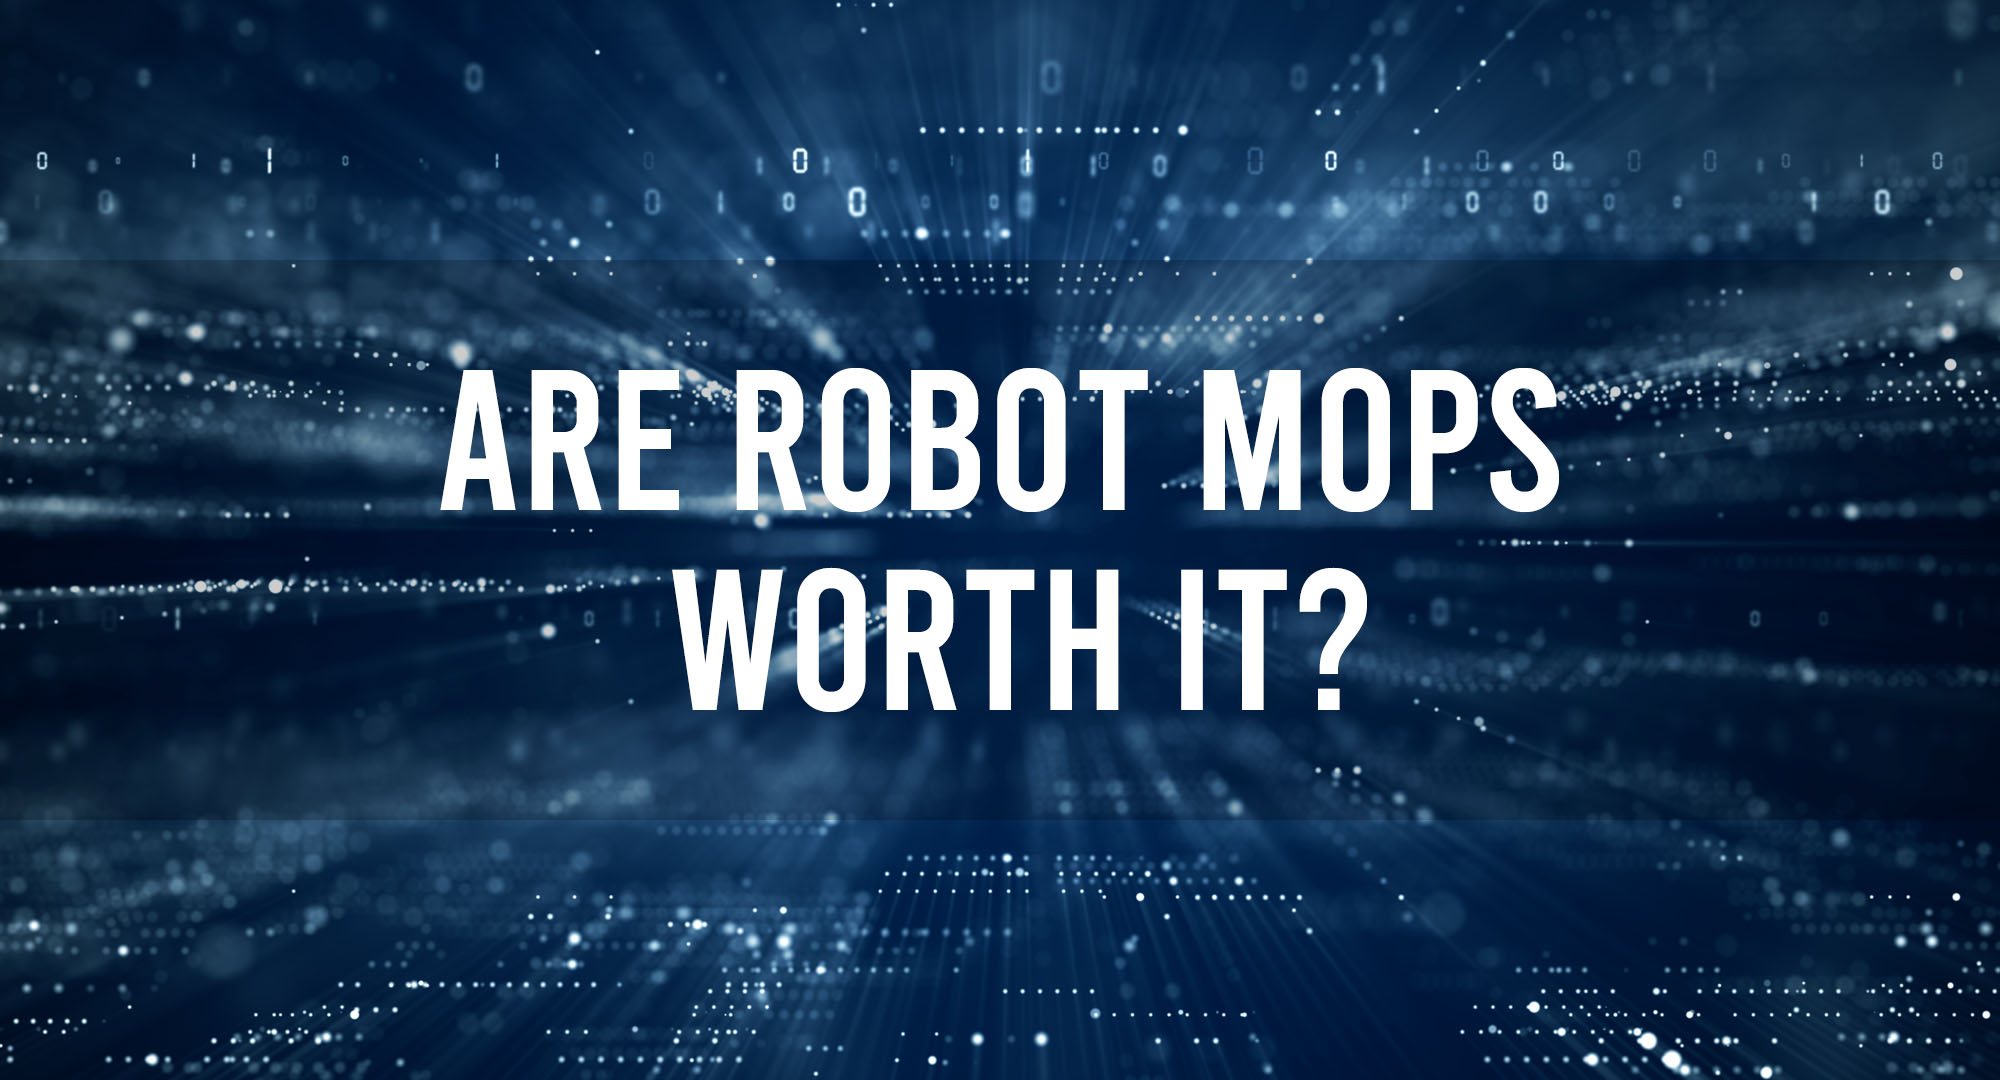 Are Robot Mops Worth It